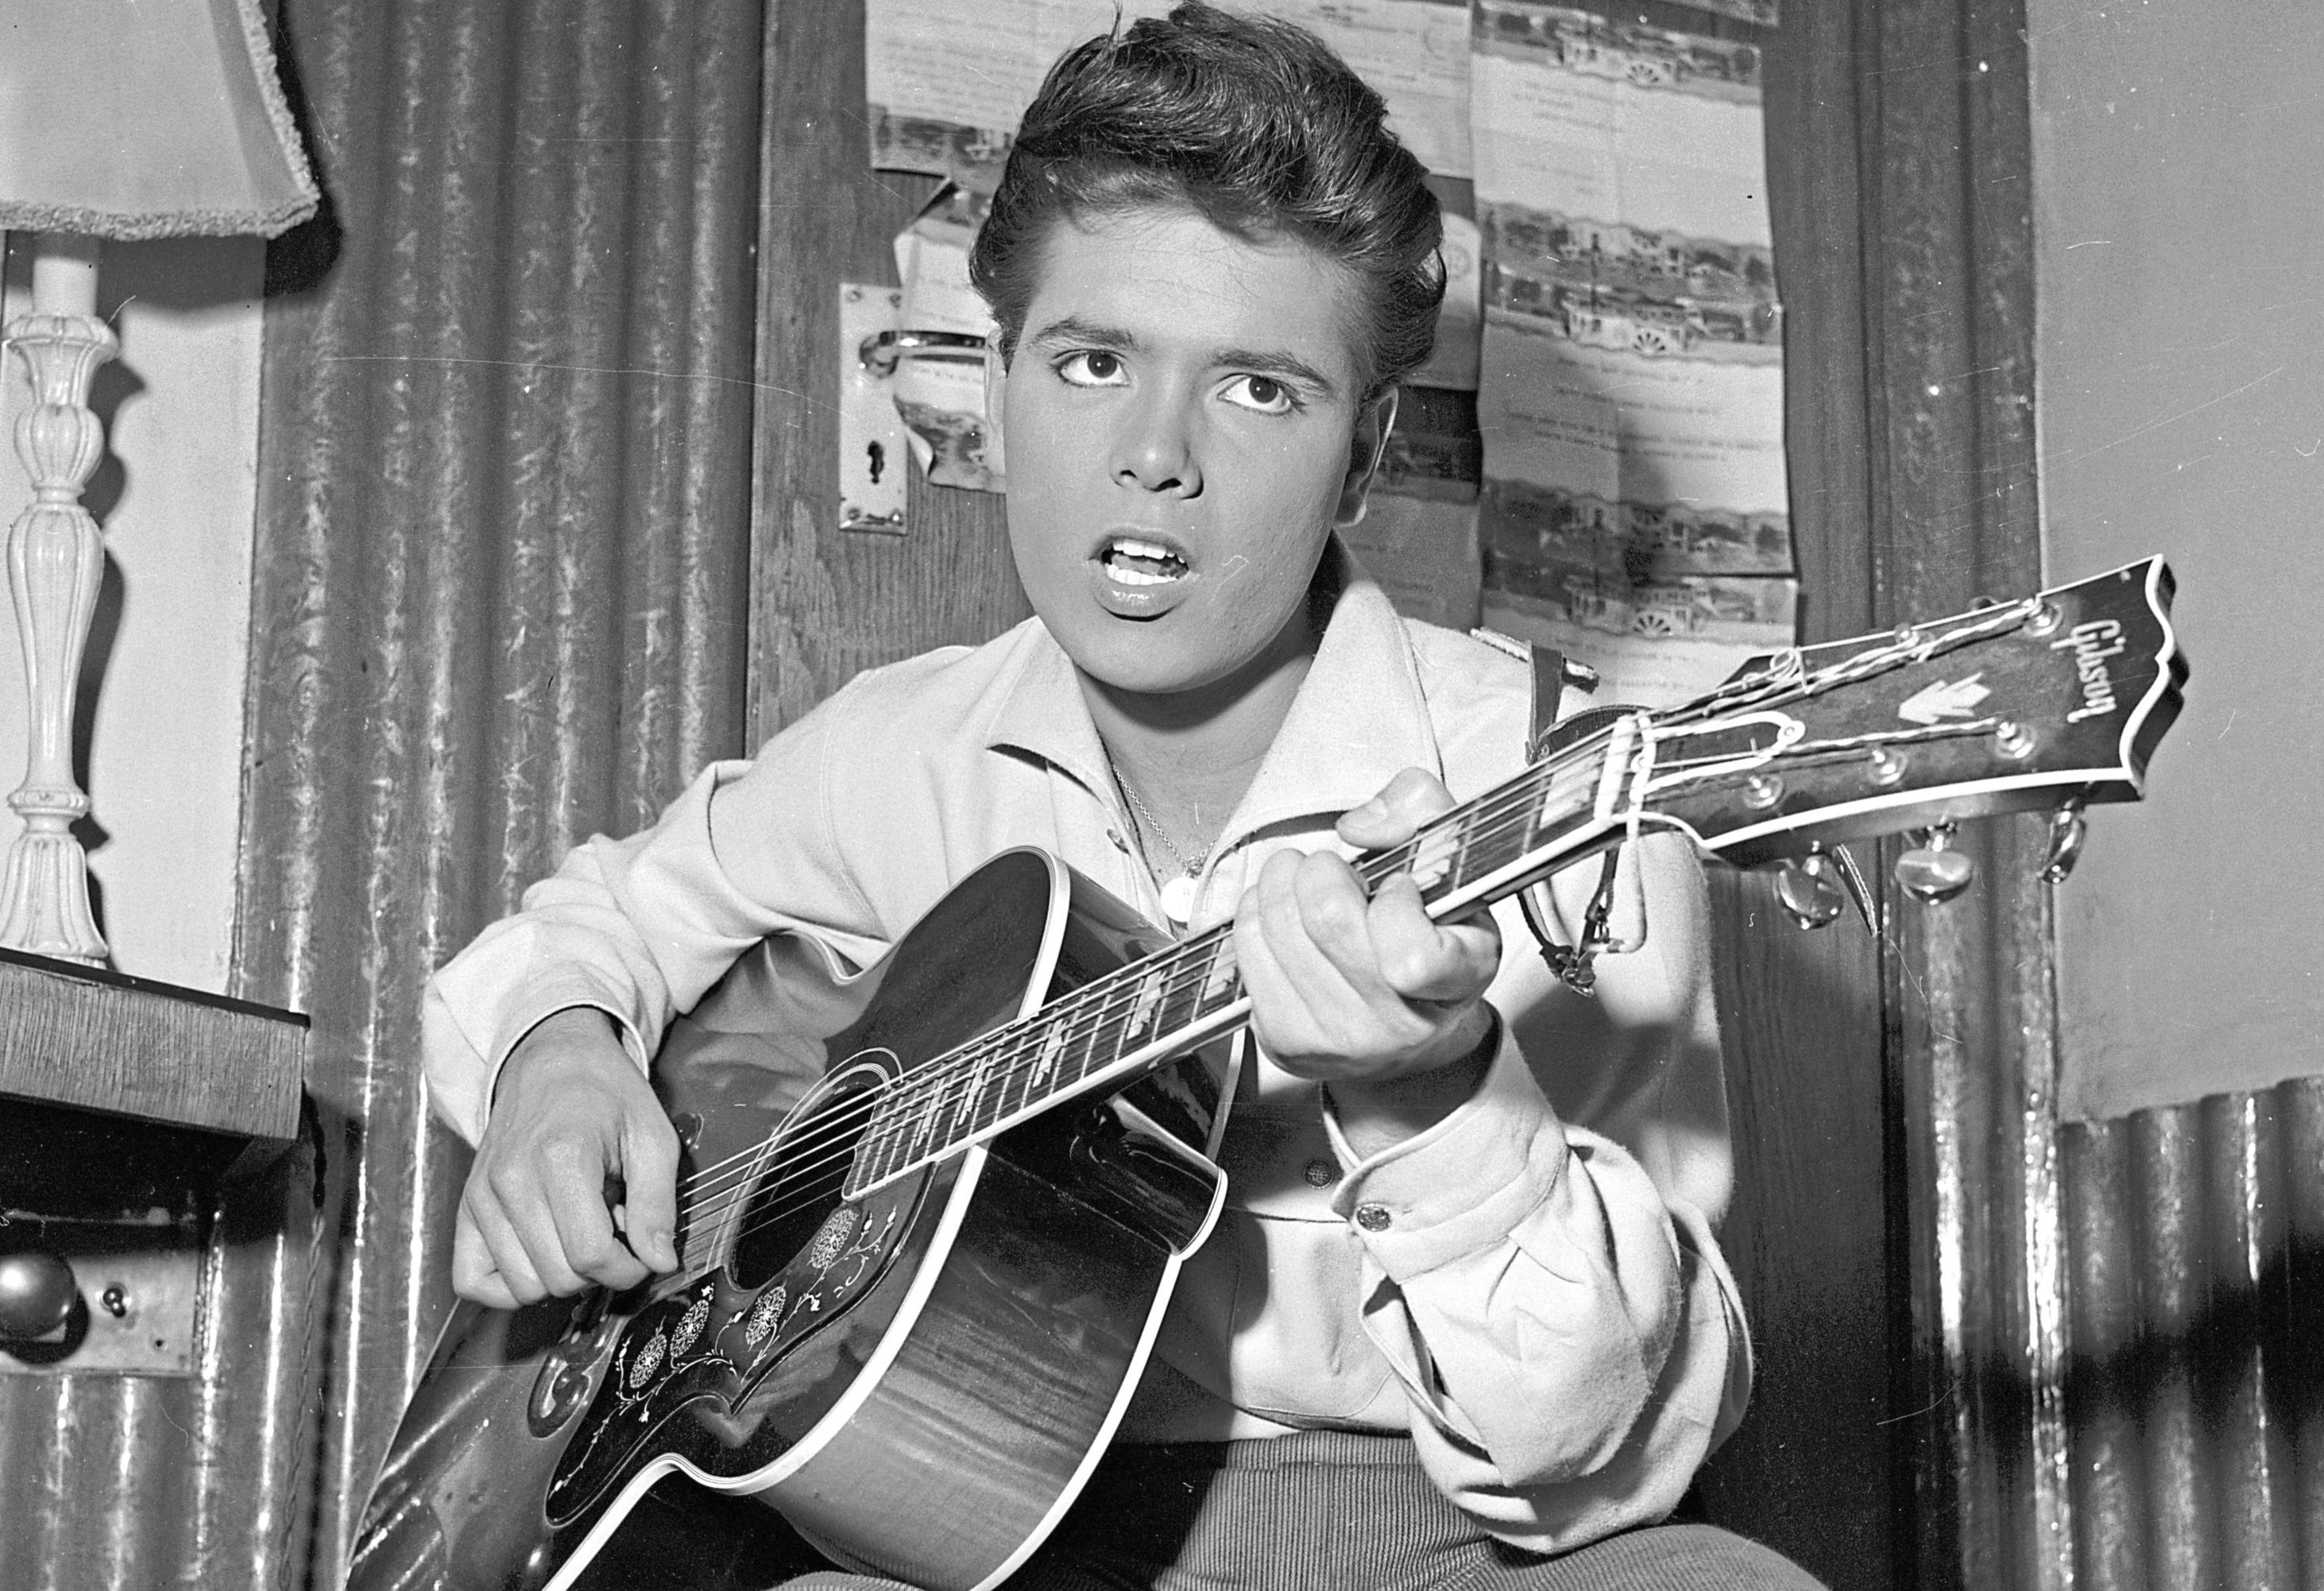 5th August 1960:  English pop star Cliff Richard strums a tune on his trusty guitar before a concert.  (John Pratt/Keystone Features/Getty Images)